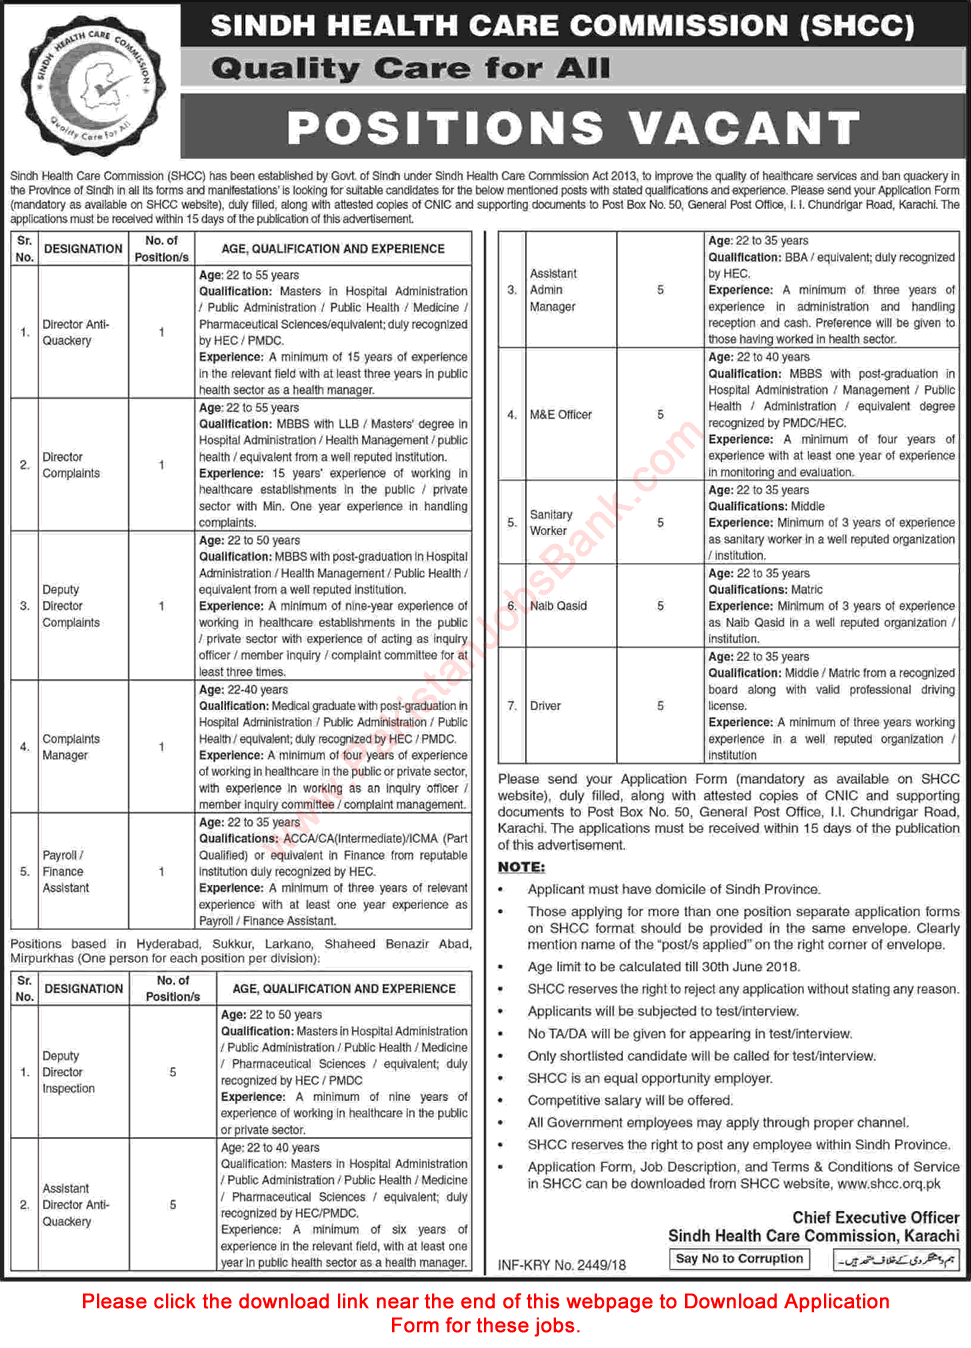 Sindh Healthcare Commission Jobs May 2018 Application Form M&E Officers, Admin Managers & Others Latest